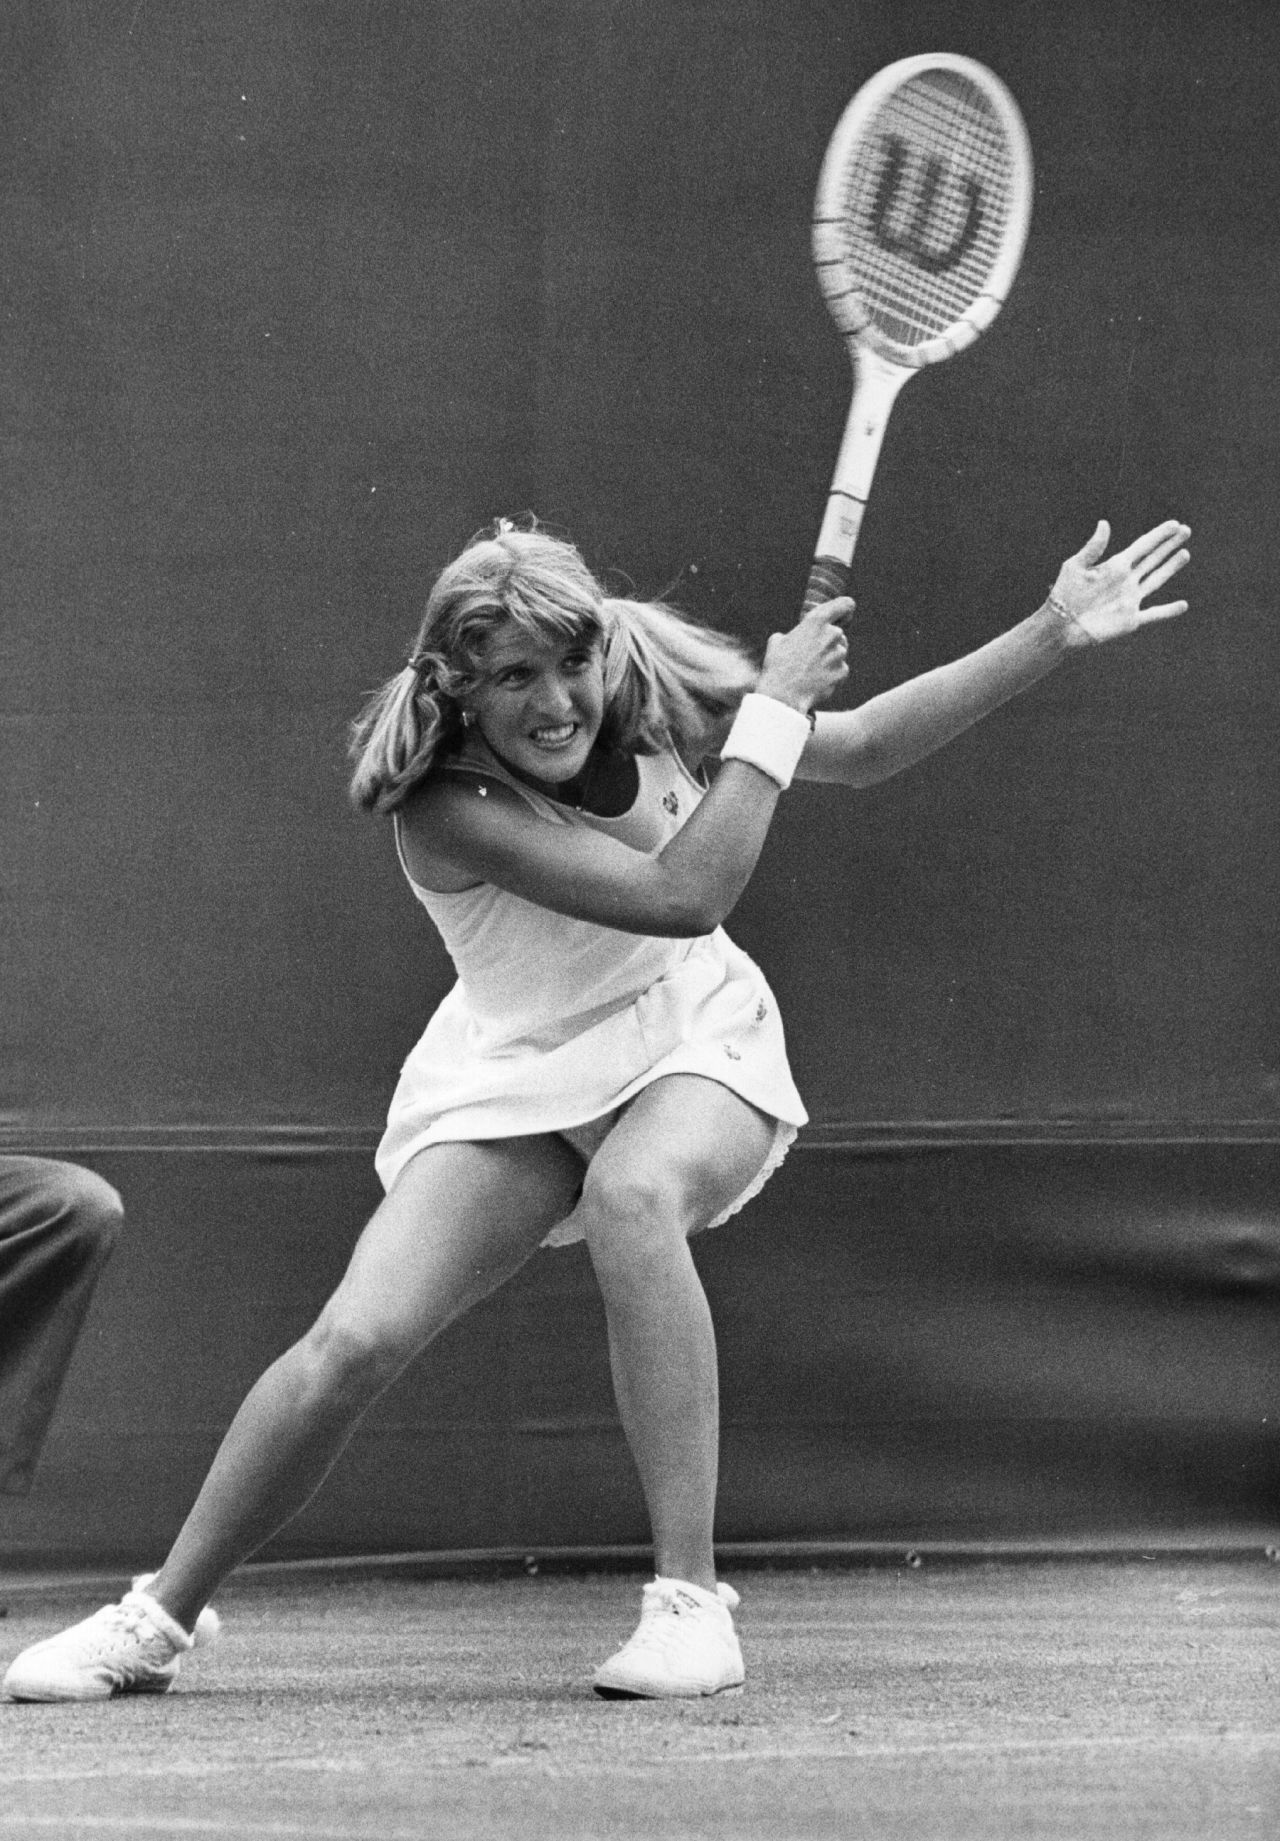 Tracy Austin won the 1979 US Open when she beat Chris Evert in the final at the age of 16.